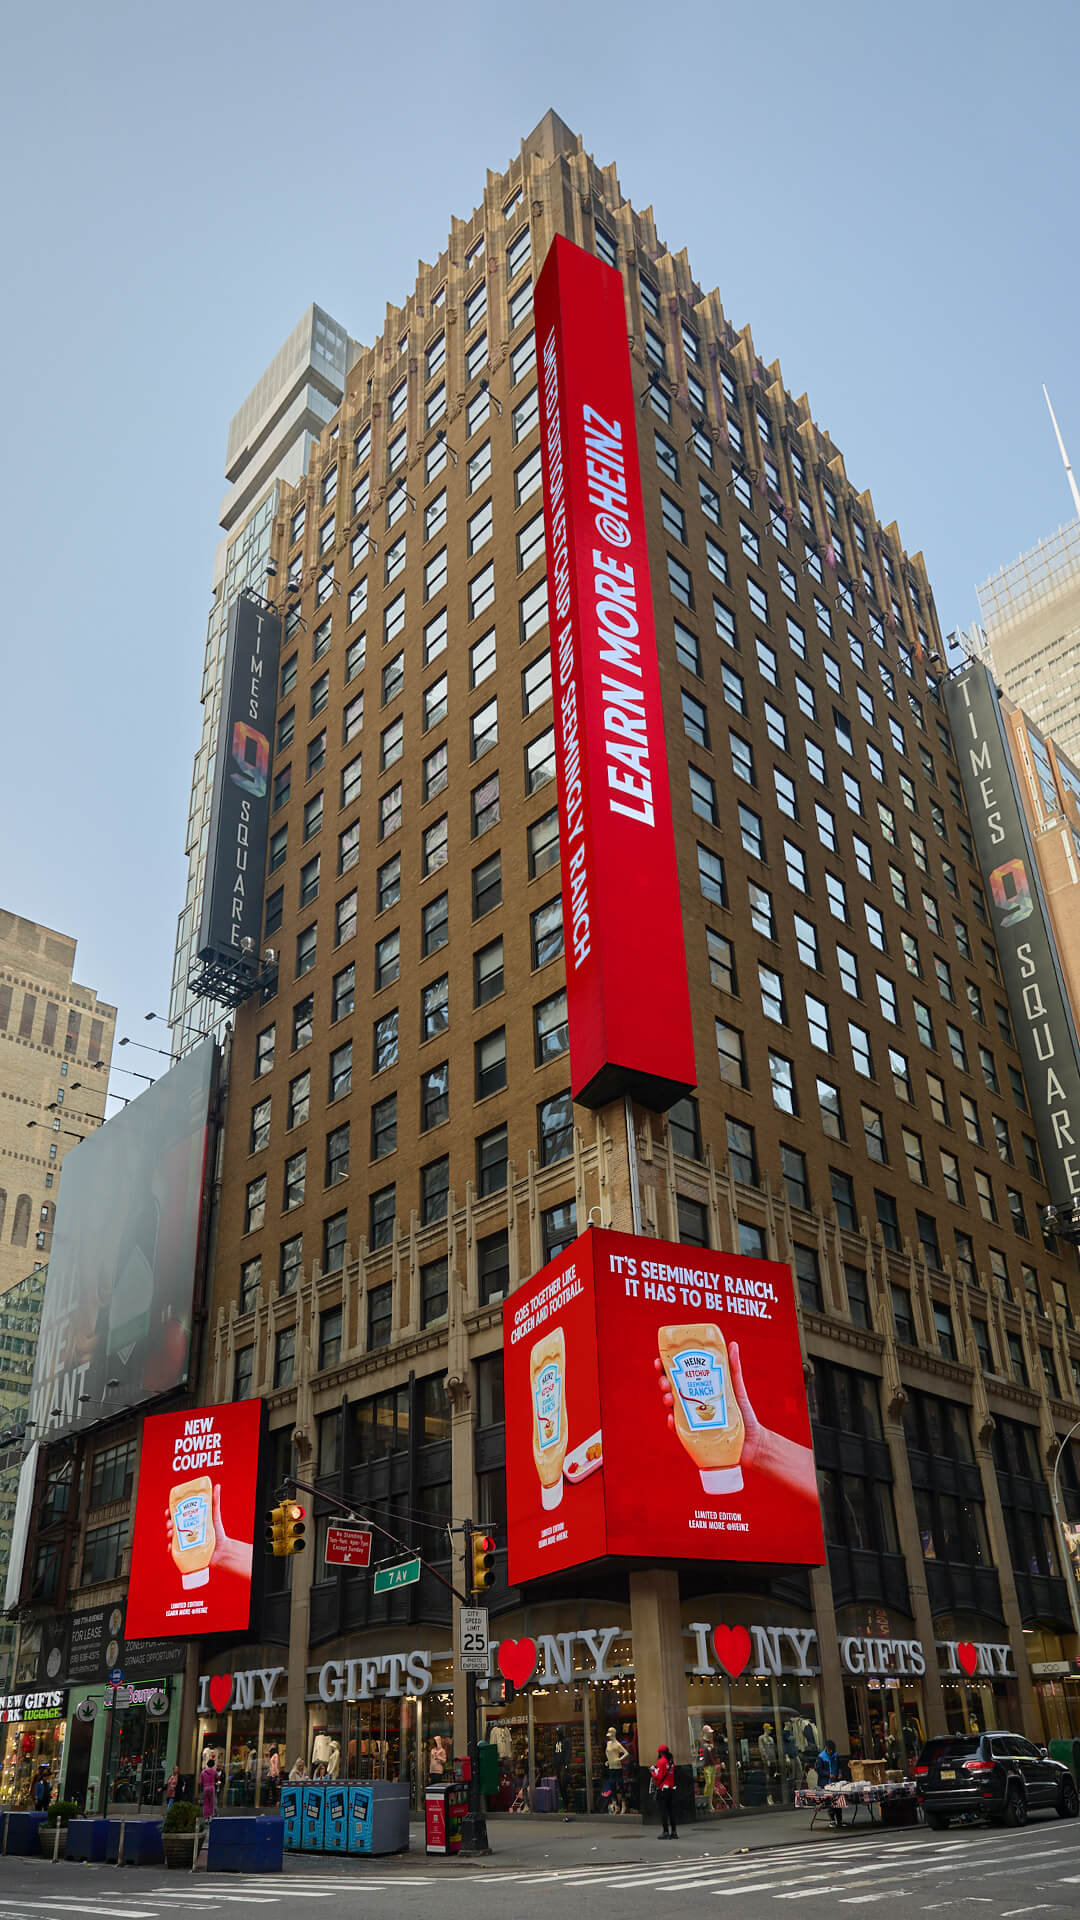 Heinz Ketchup and Seemingly Ranch_2023_Taylor Swift_New York Times Square Ads 3